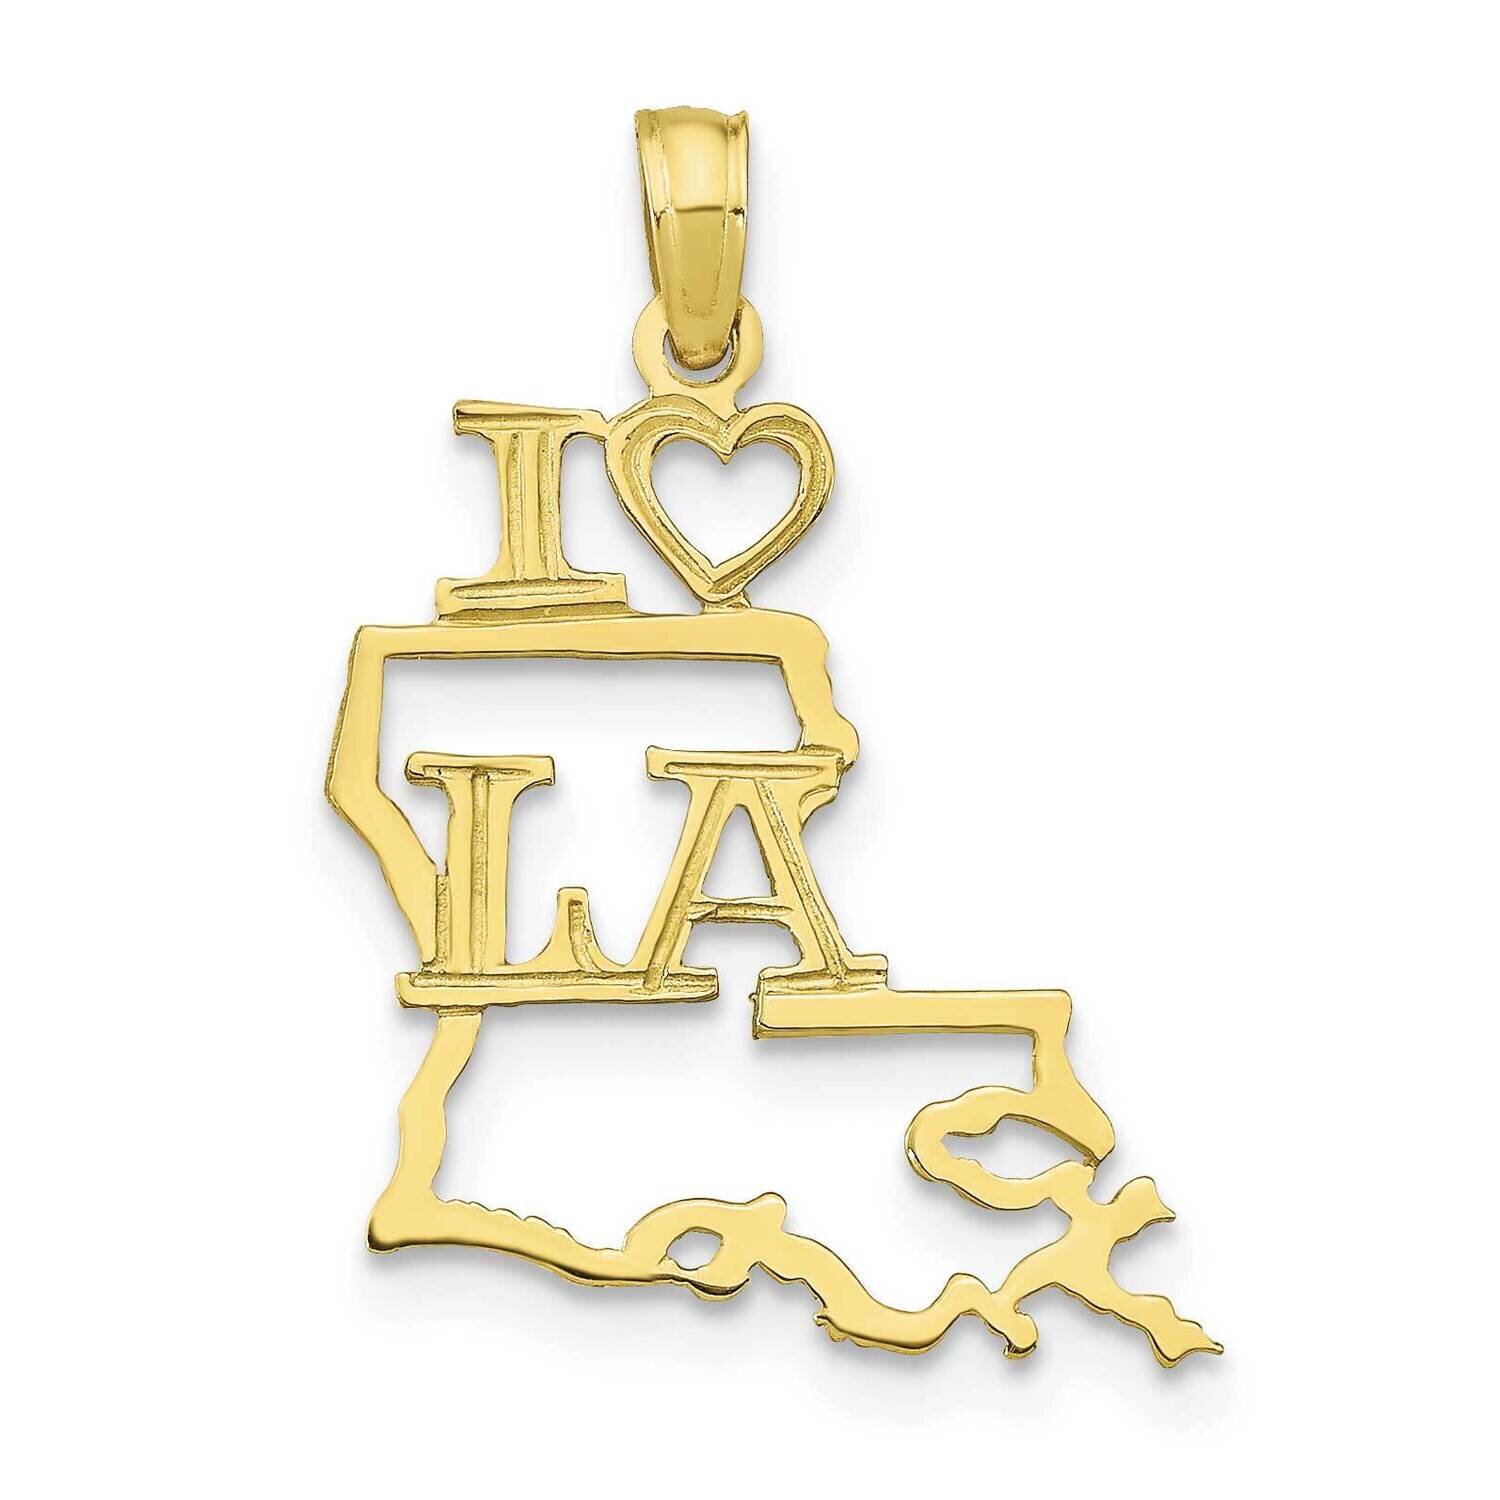 Louisiana State Pendant 10k Gold Solid 10D1165